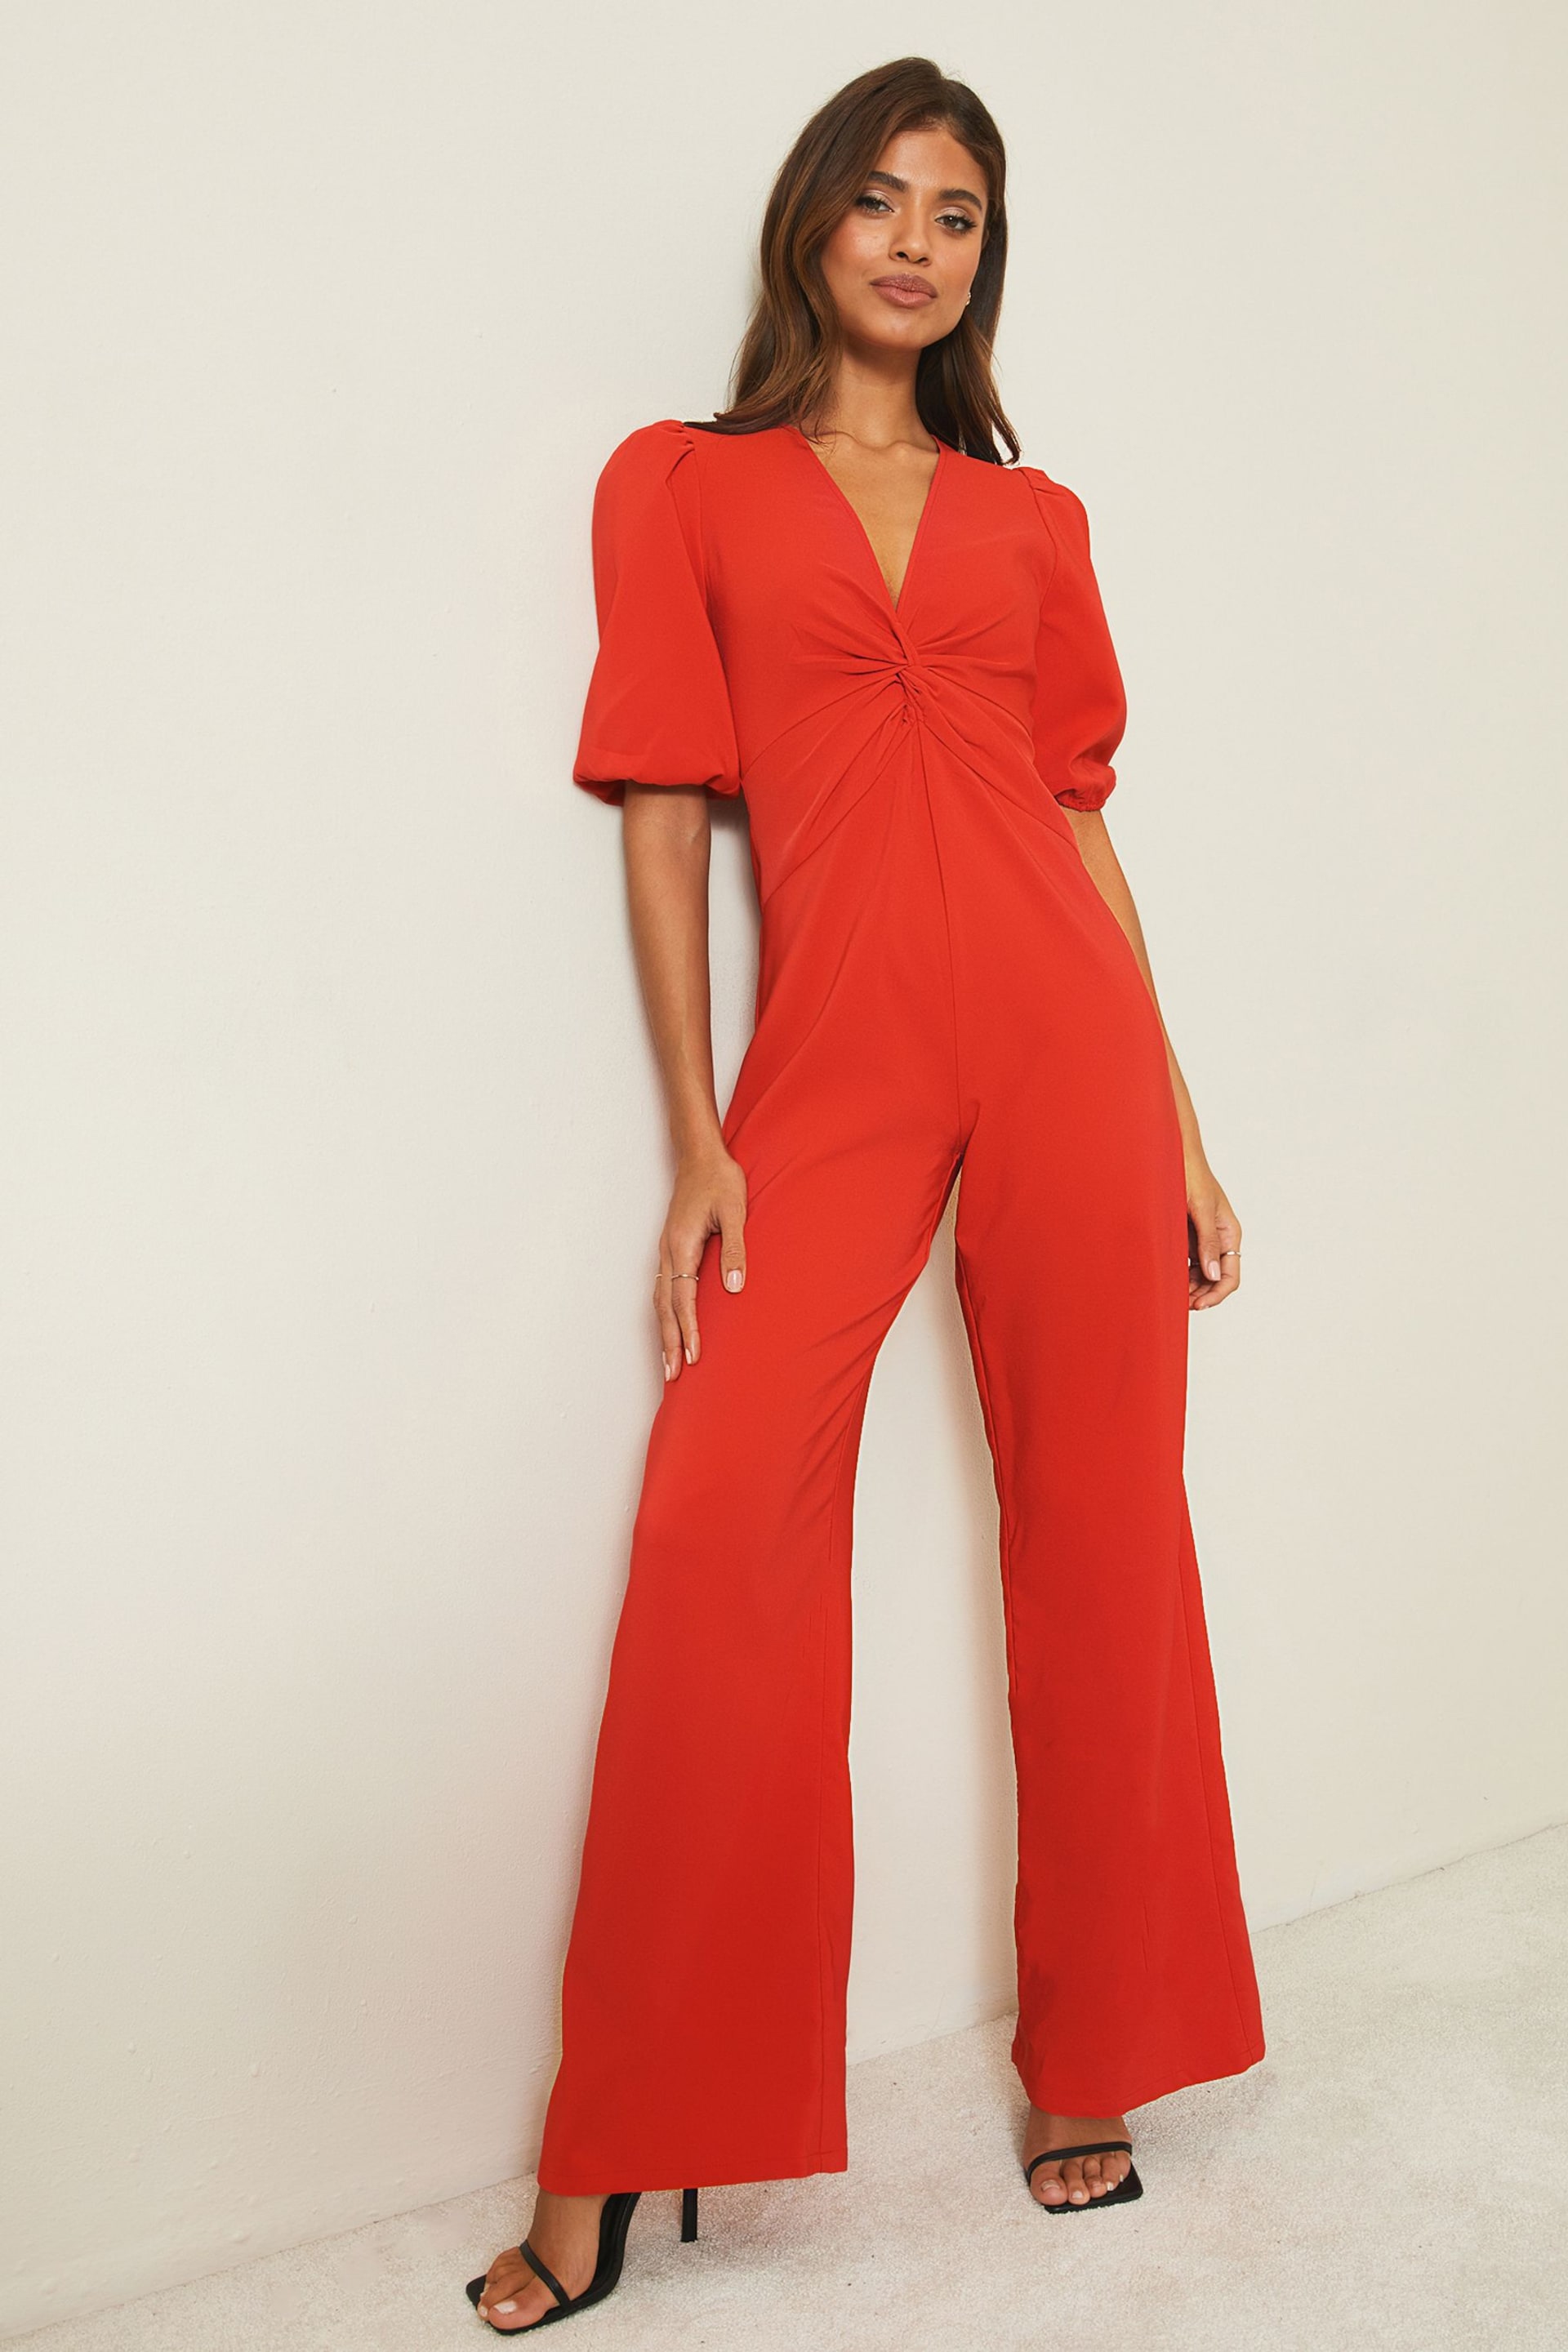 Lipsy Red Knot Puff Sleeve Jumpsuit - Image 3 of 4